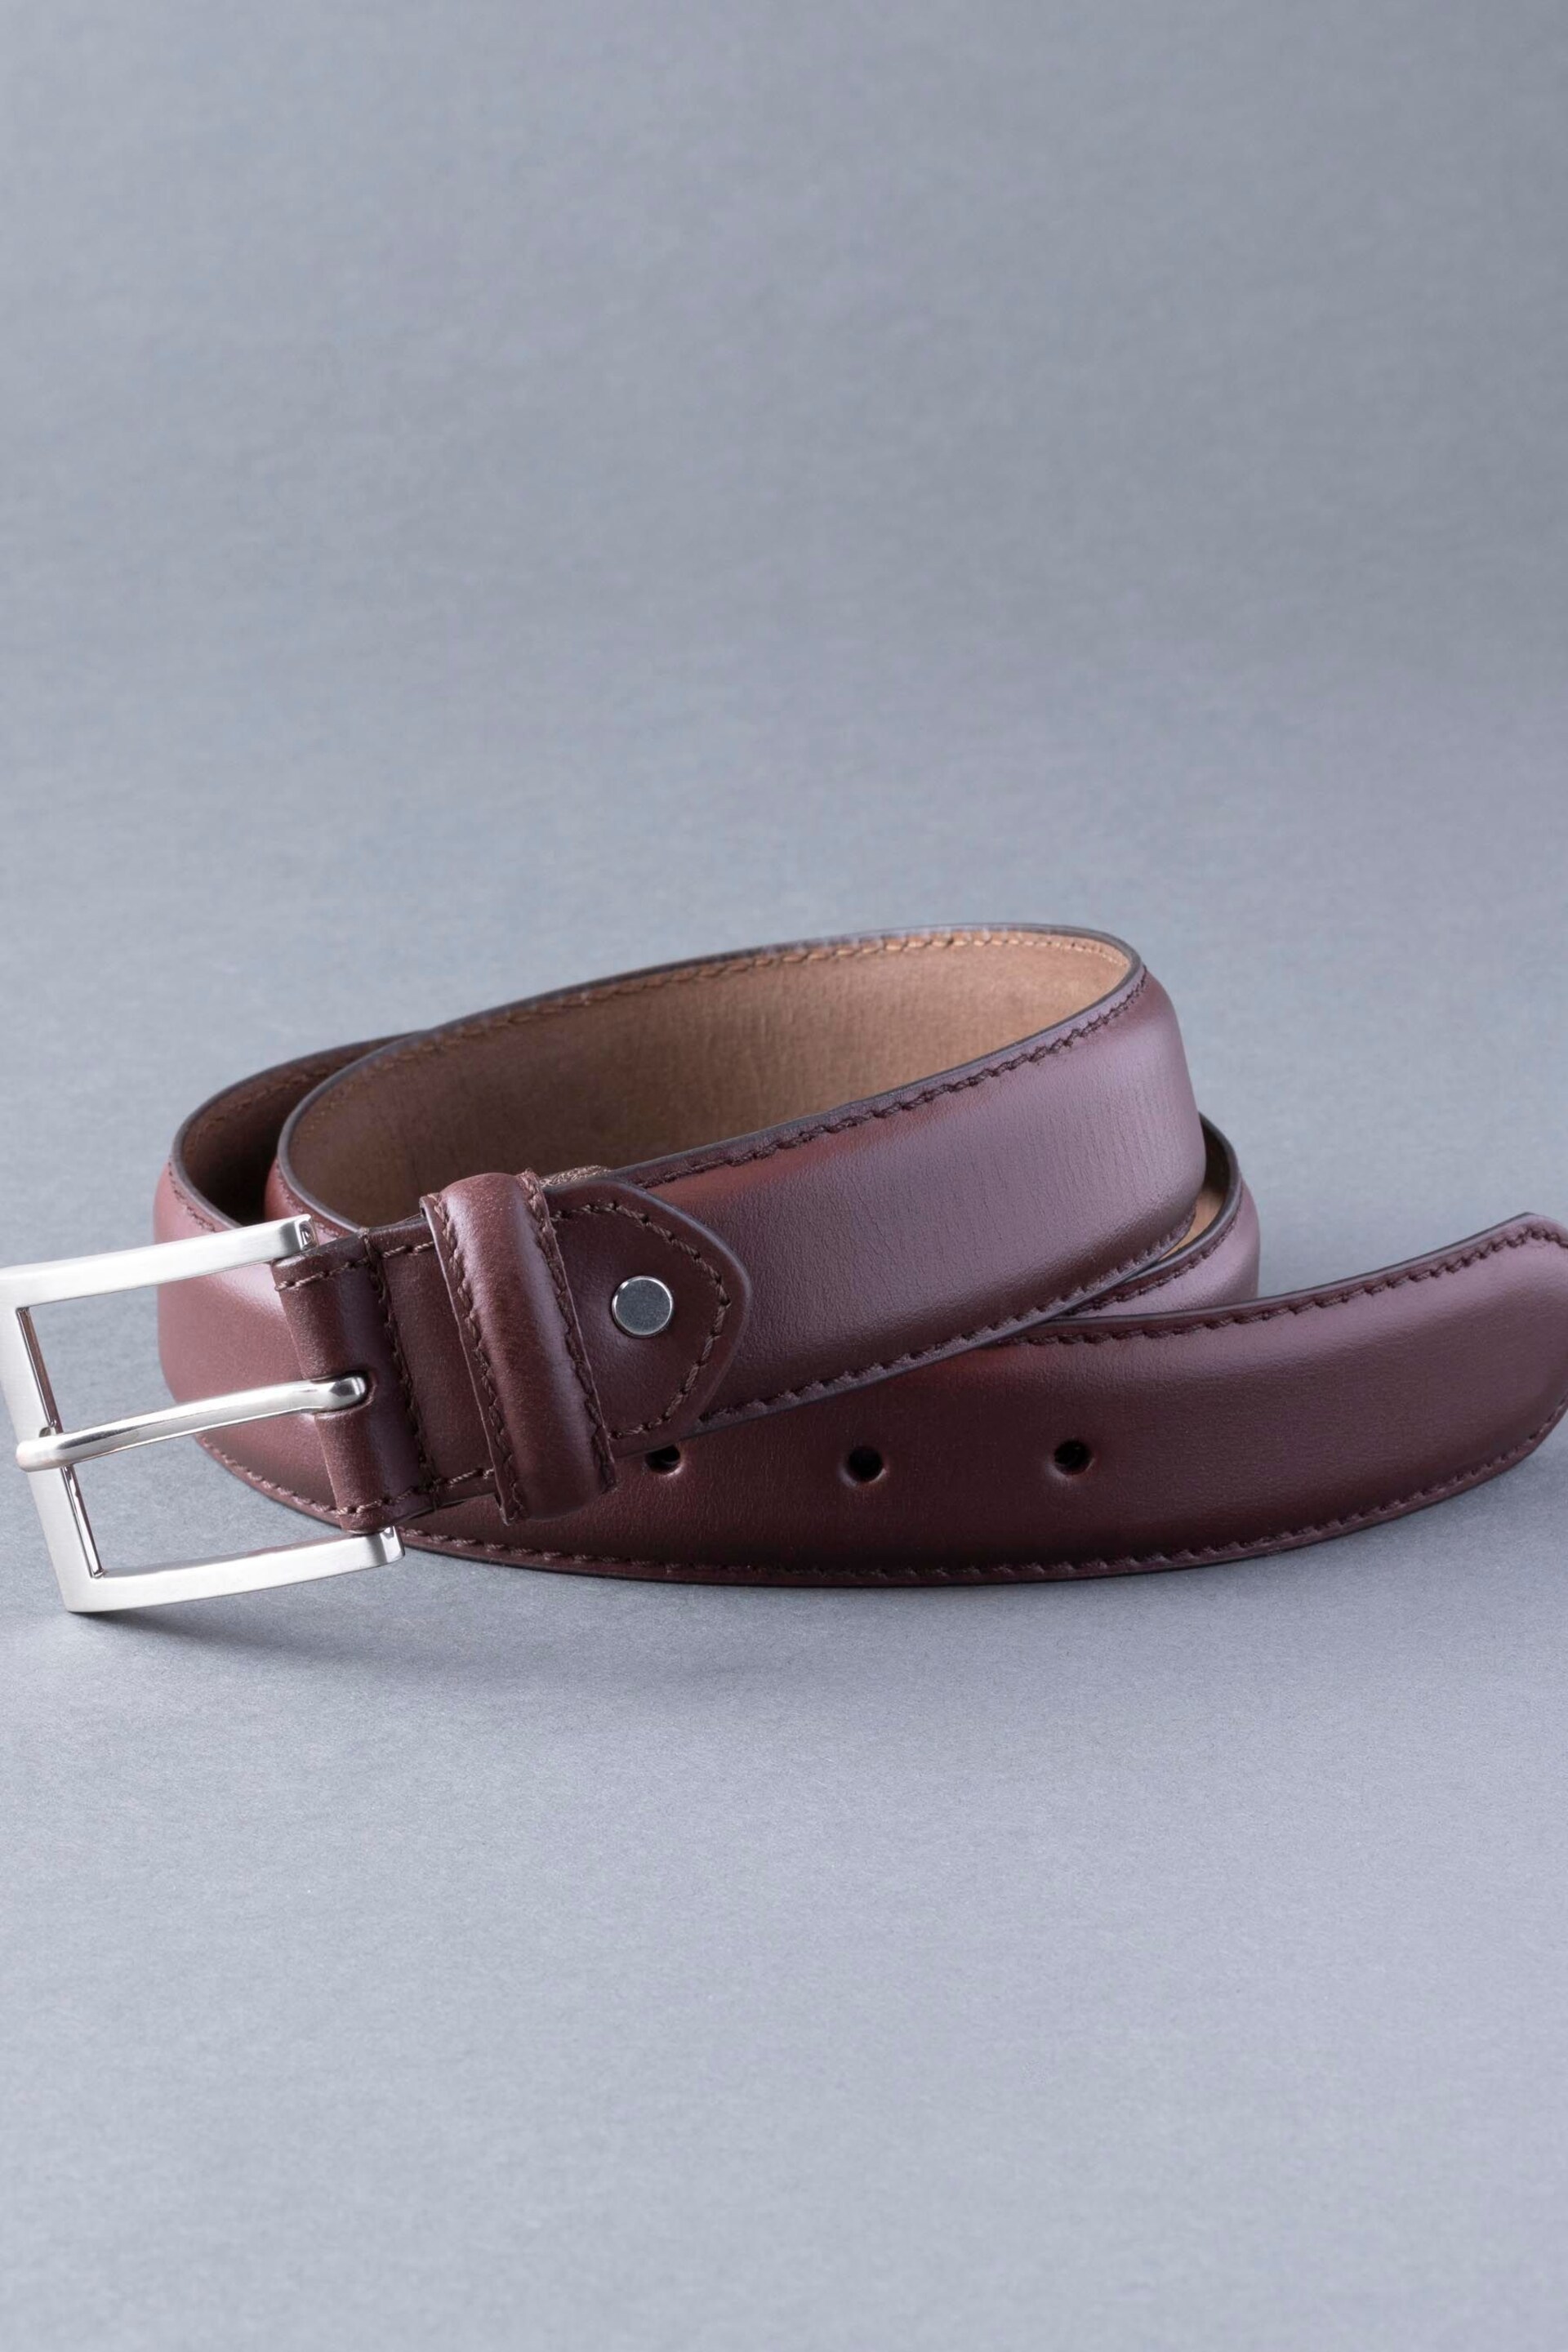 Lakeland Leather Brown Staveley Leather Belt - Image 2 of 5